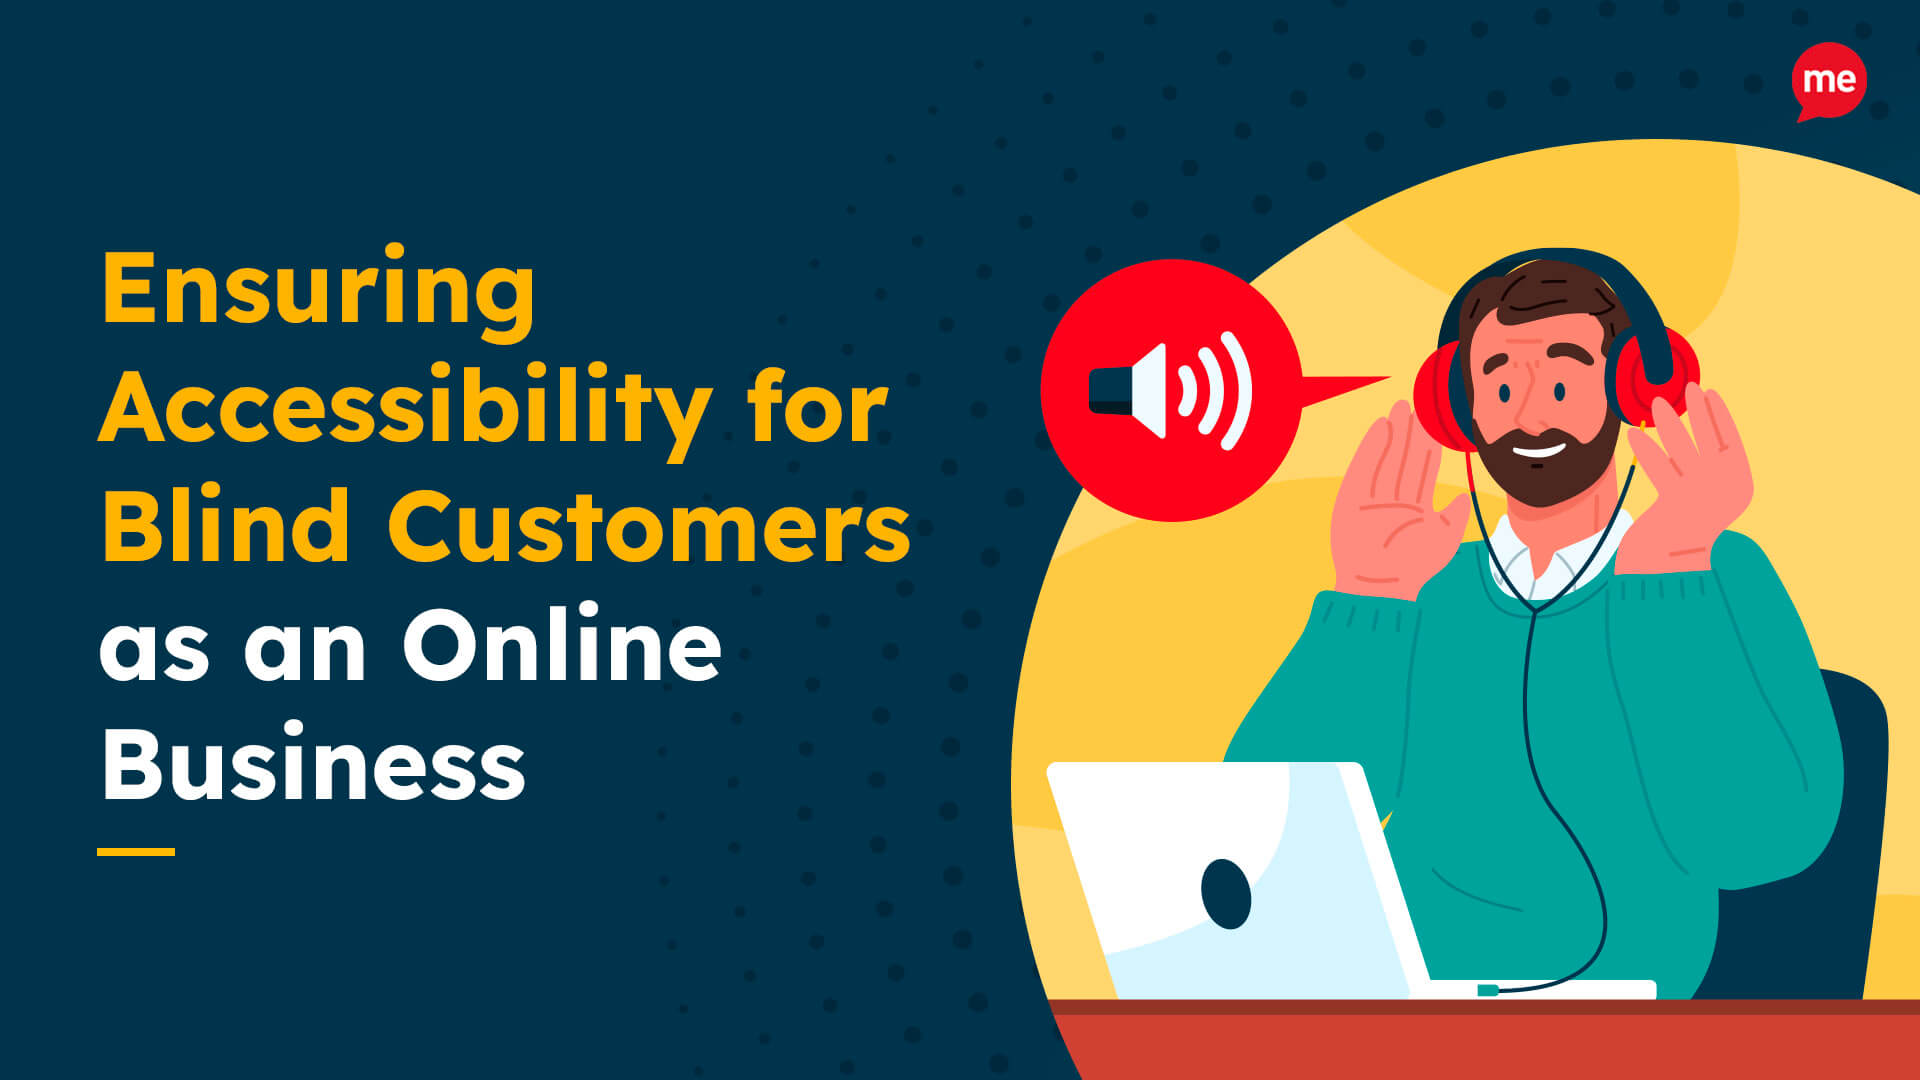 Ensuring Accessibility for Blind Customers as an Online Business